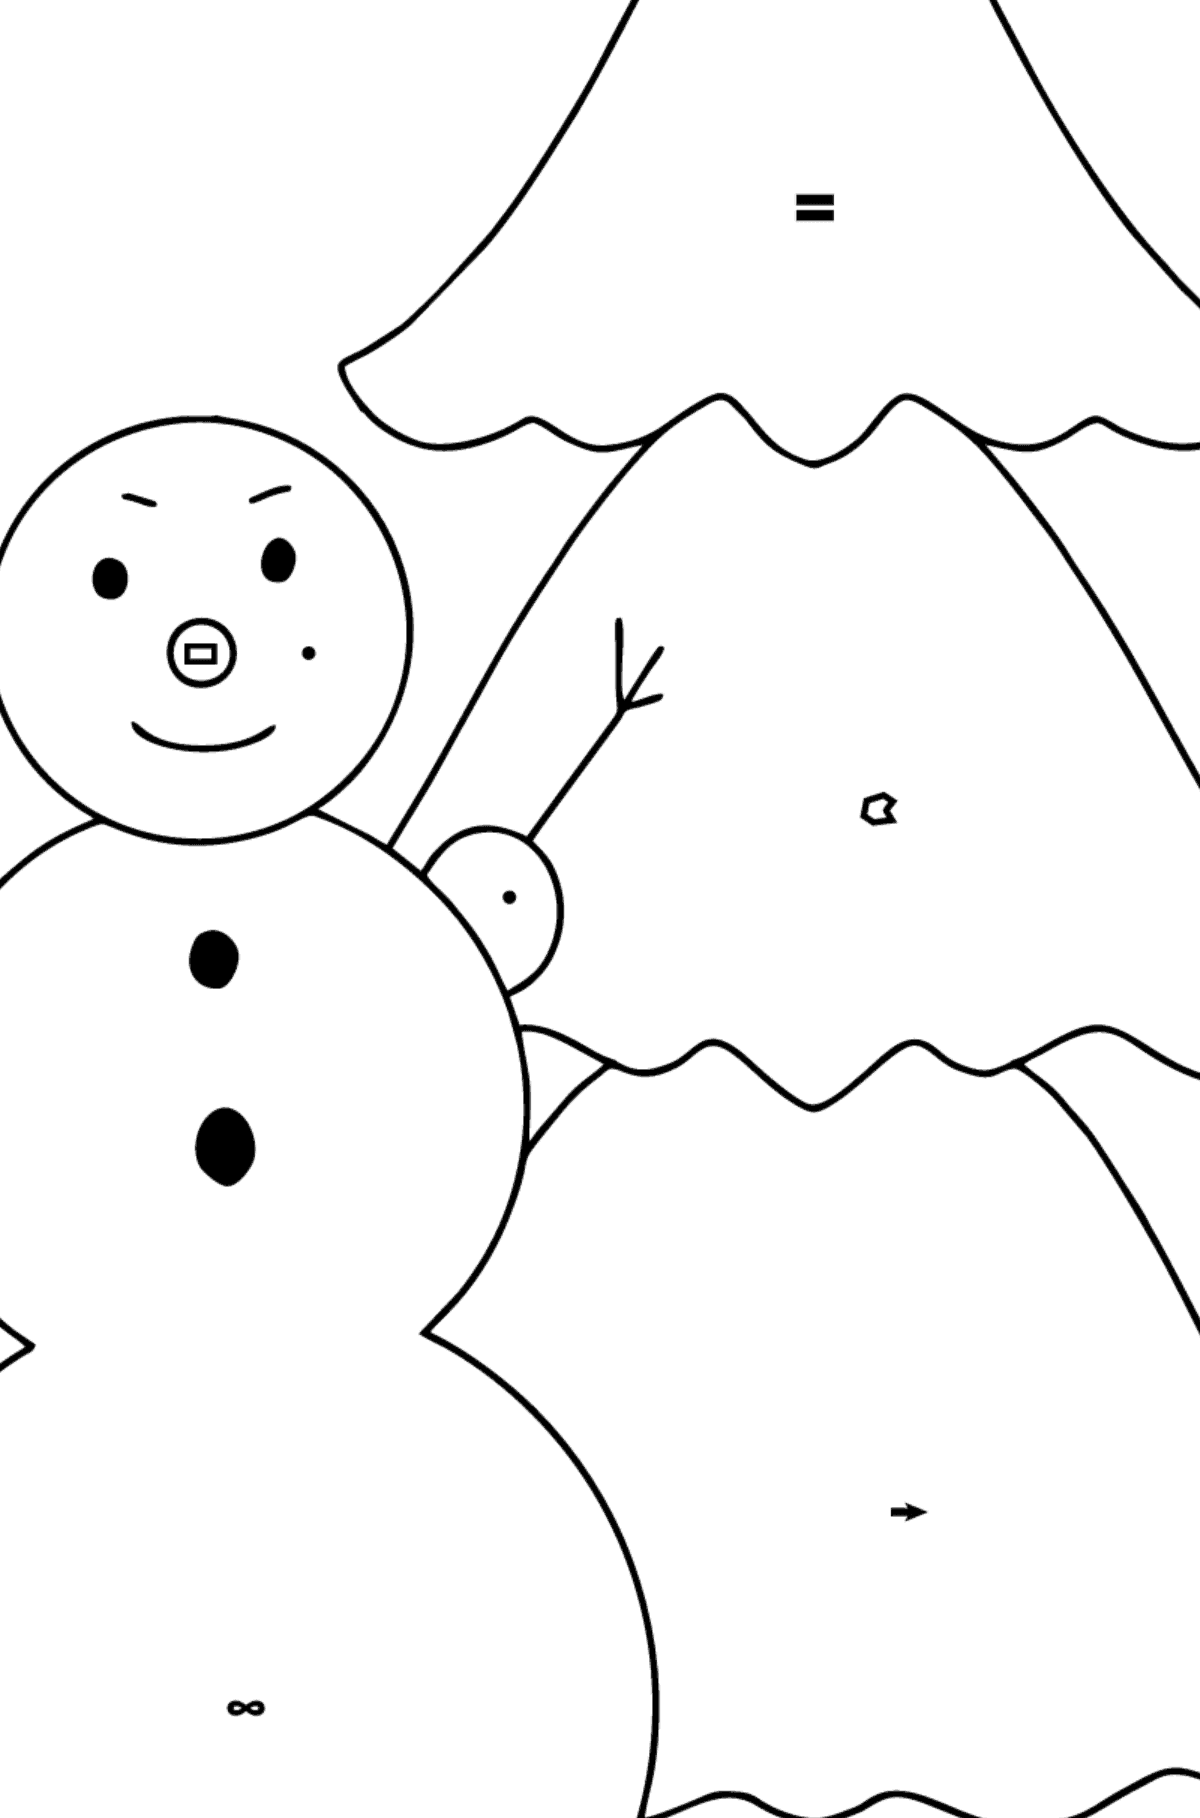 Snowman coloring page for kids - Coloring by Symbols and Geometric Shapes for Kids